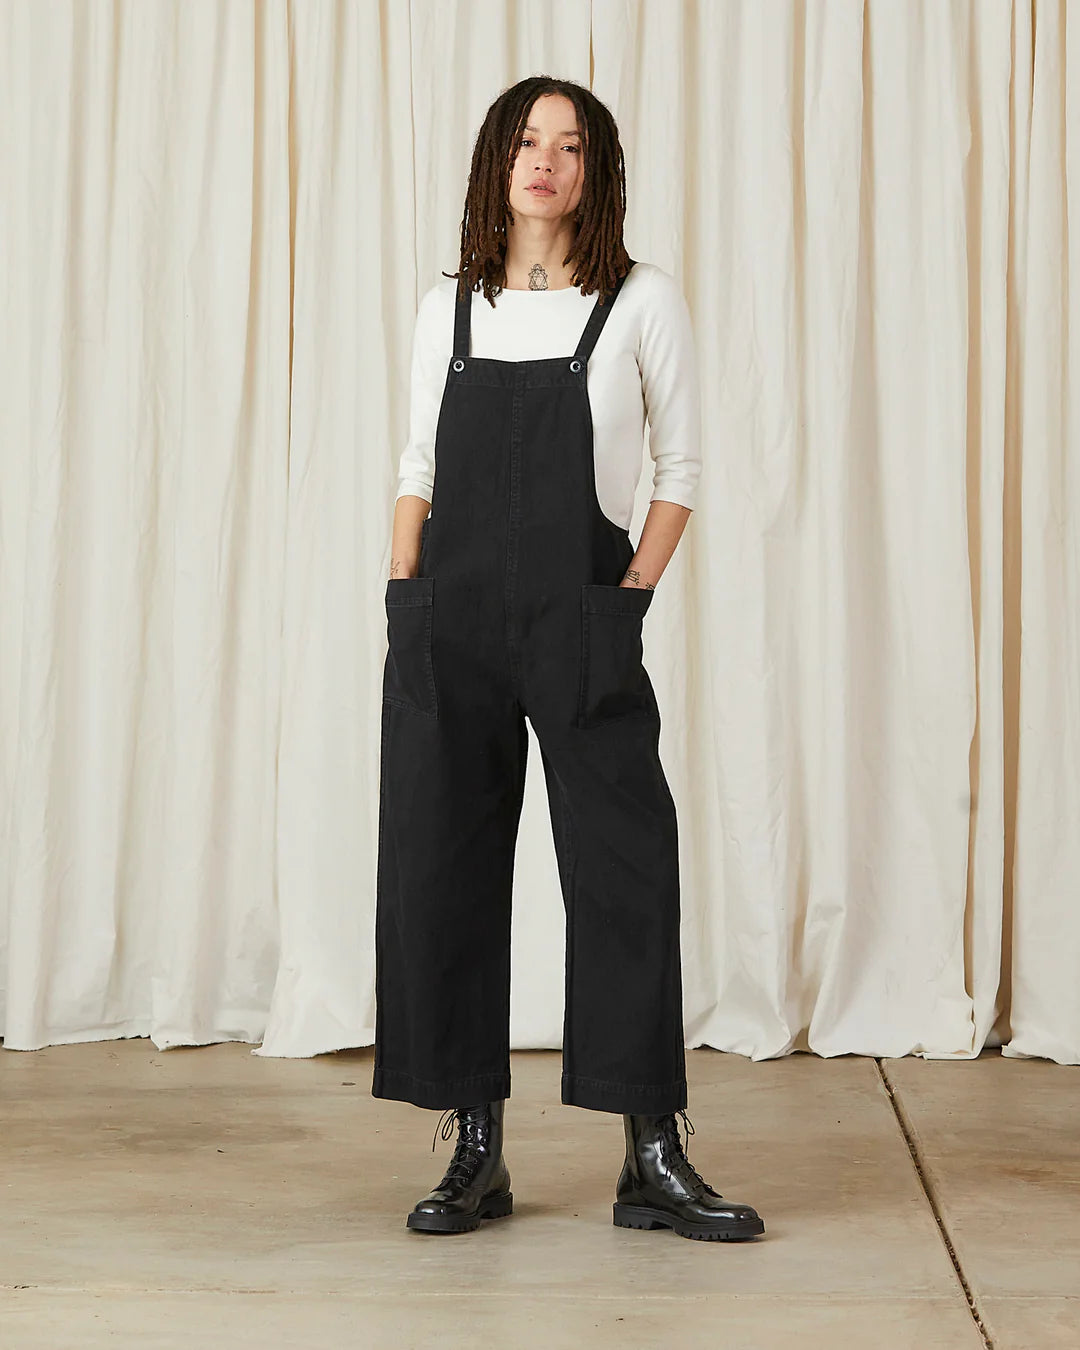 Overall Jumper - Faded Black